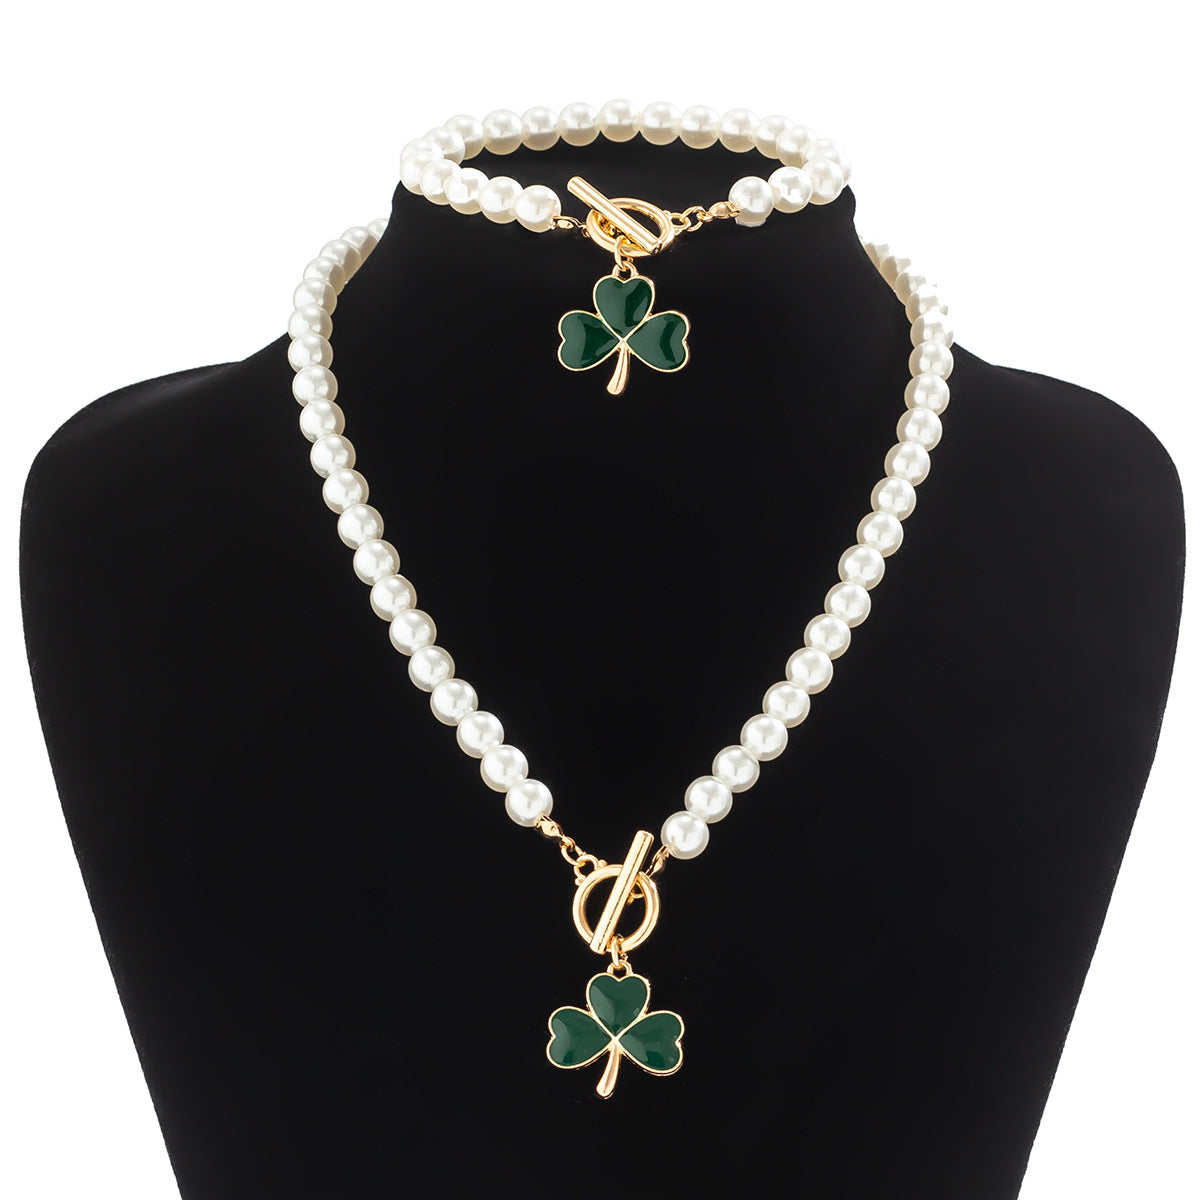 Green Oktoberfest Beaded Necklace with Imitation Pearls and Three Petal Grass Design